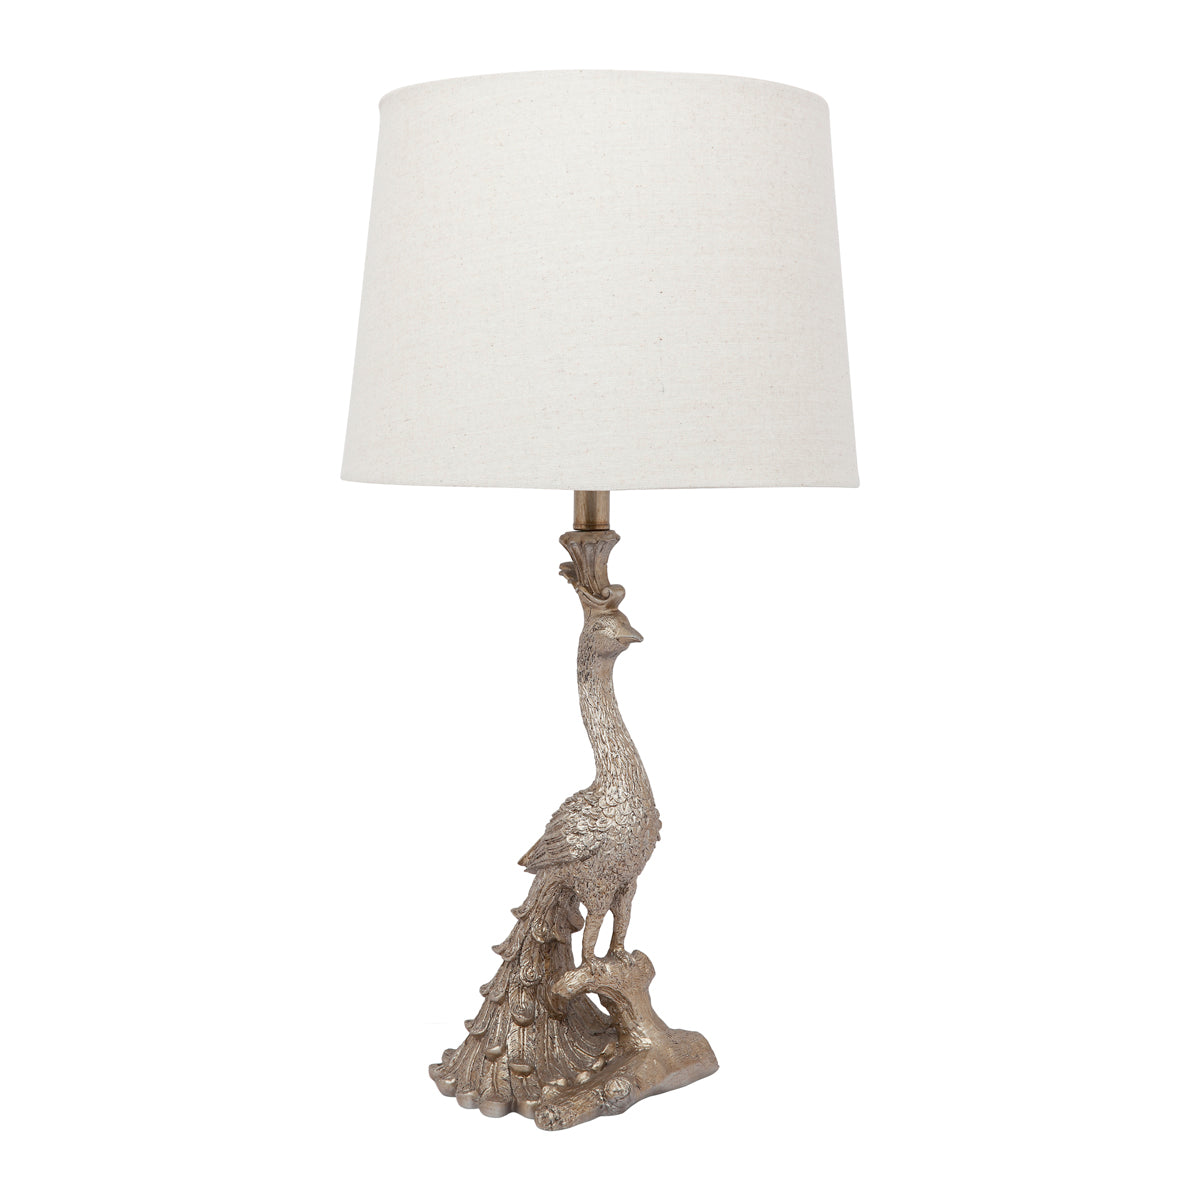 Peacock Table Lamp - Champagne Gold